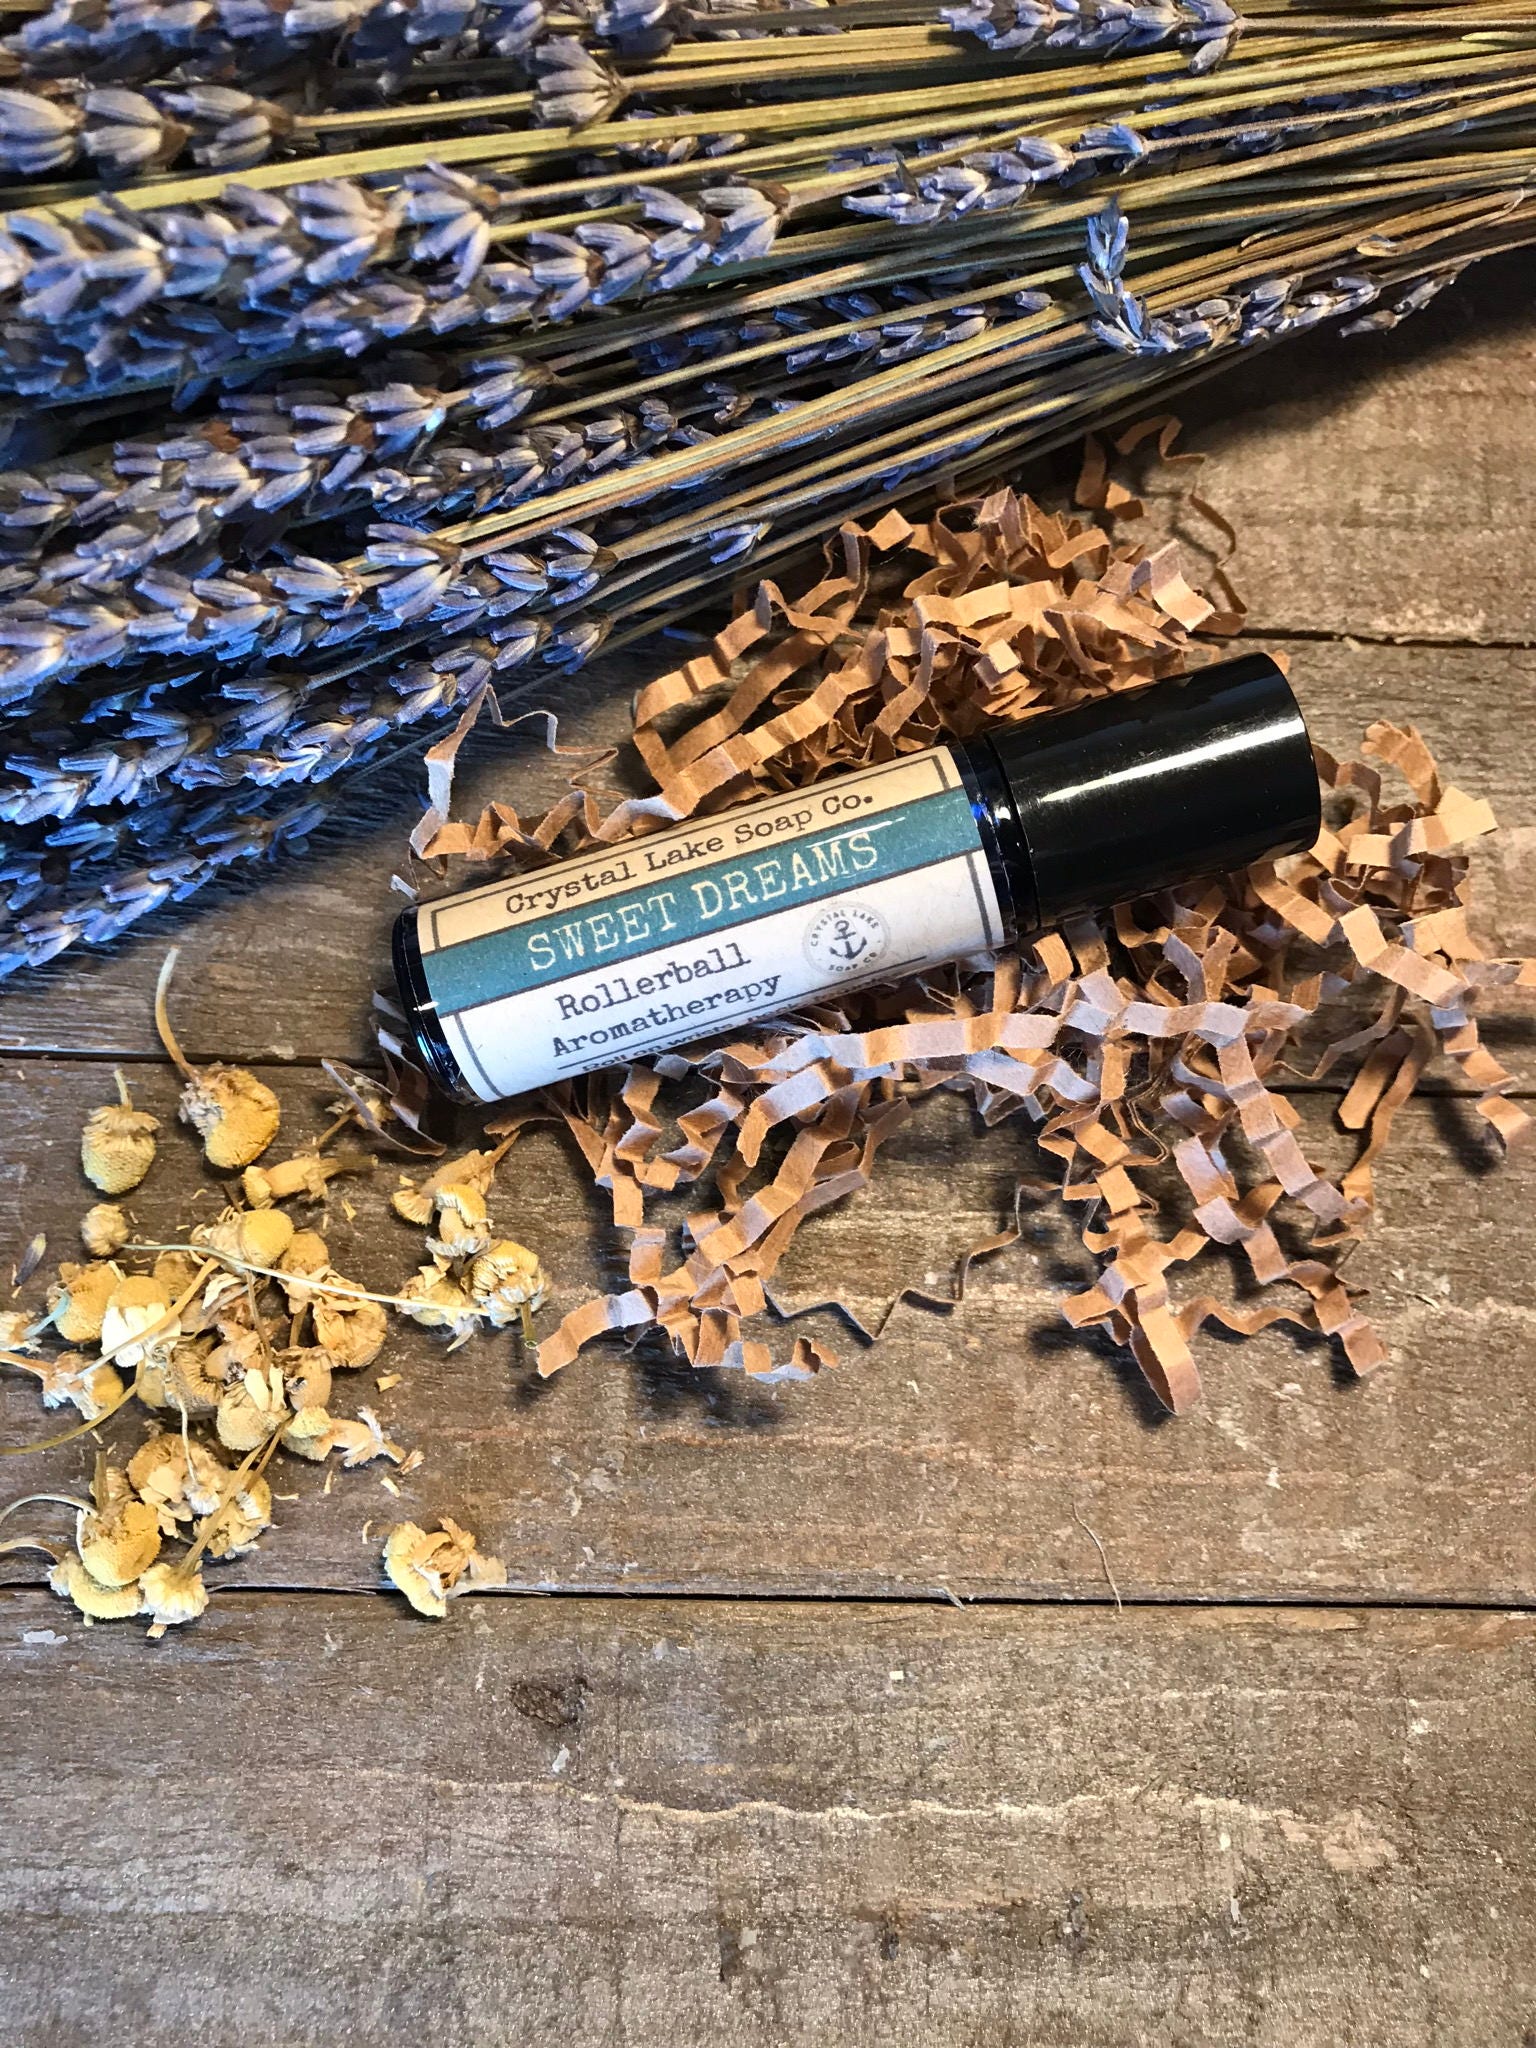 Sweat Dreams blends į 1,,m essential oils to